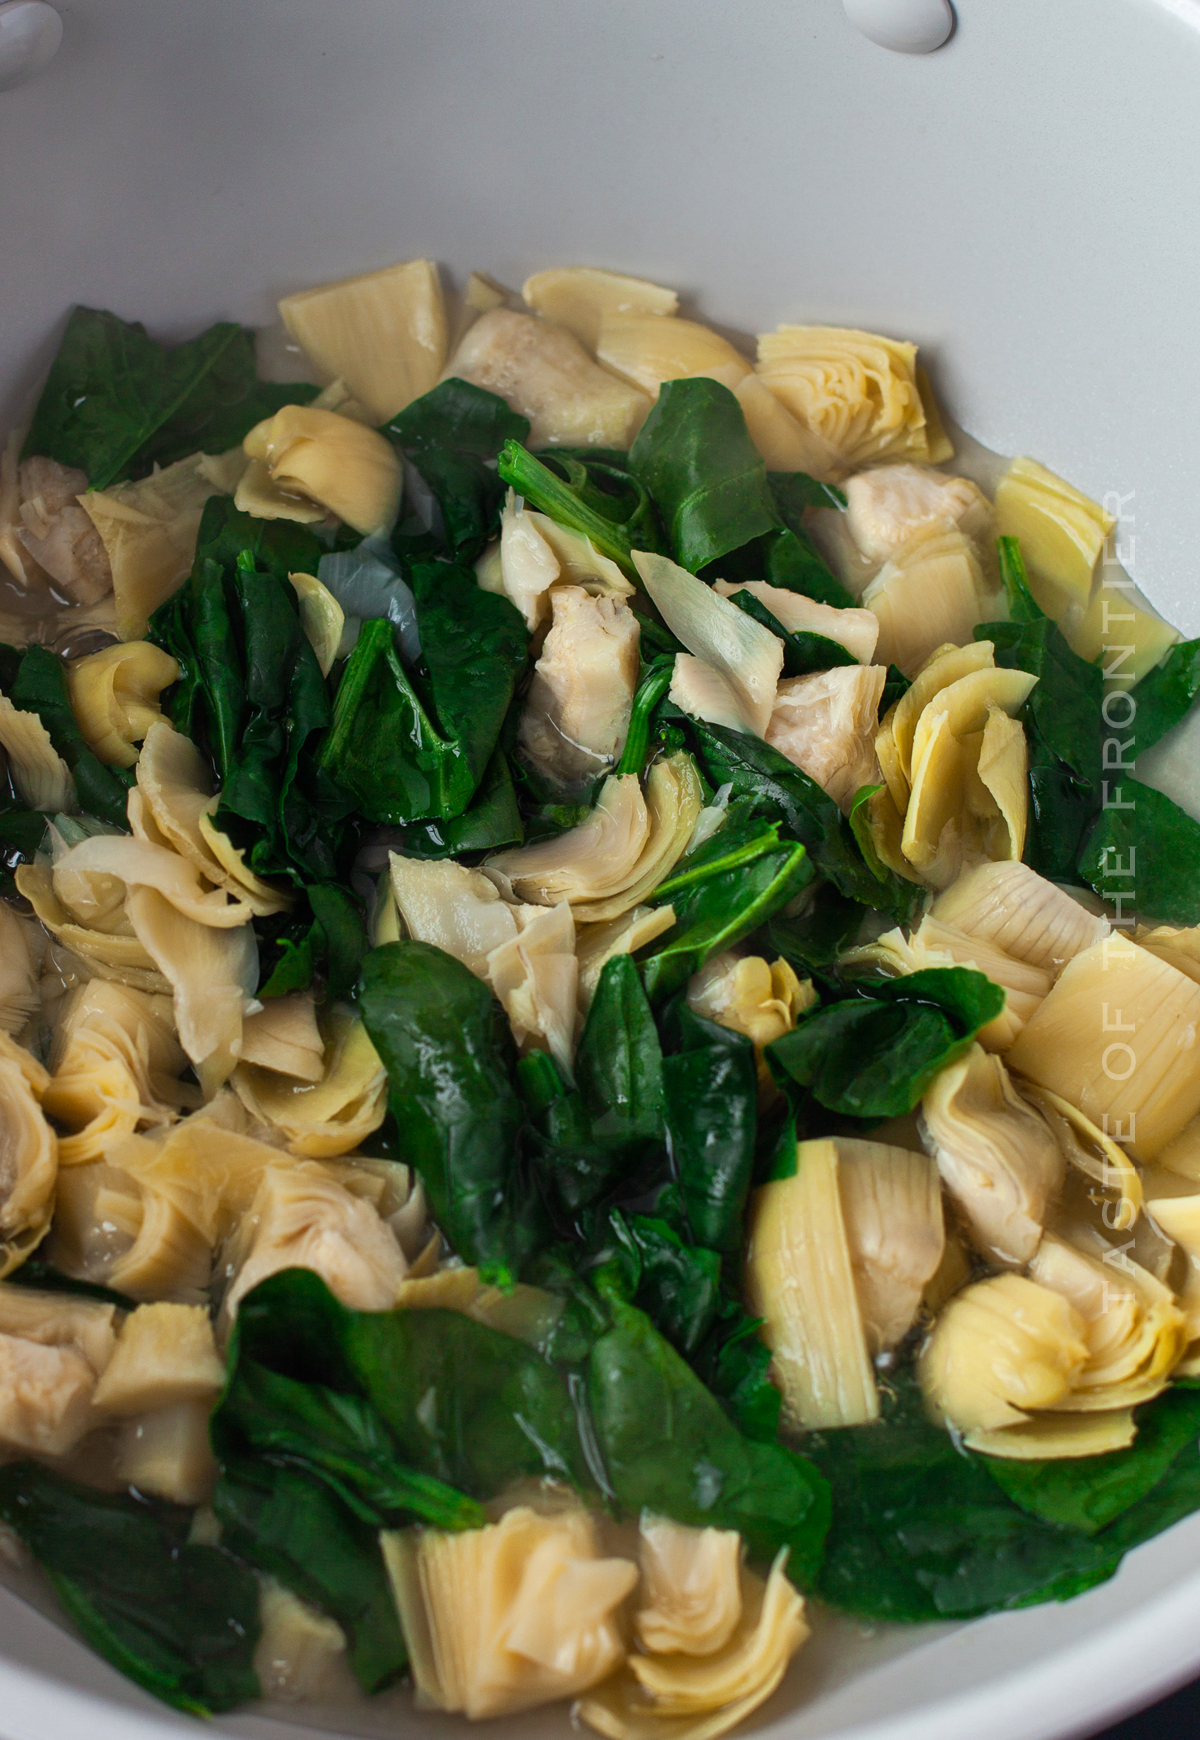 boil the spinach and artichokes